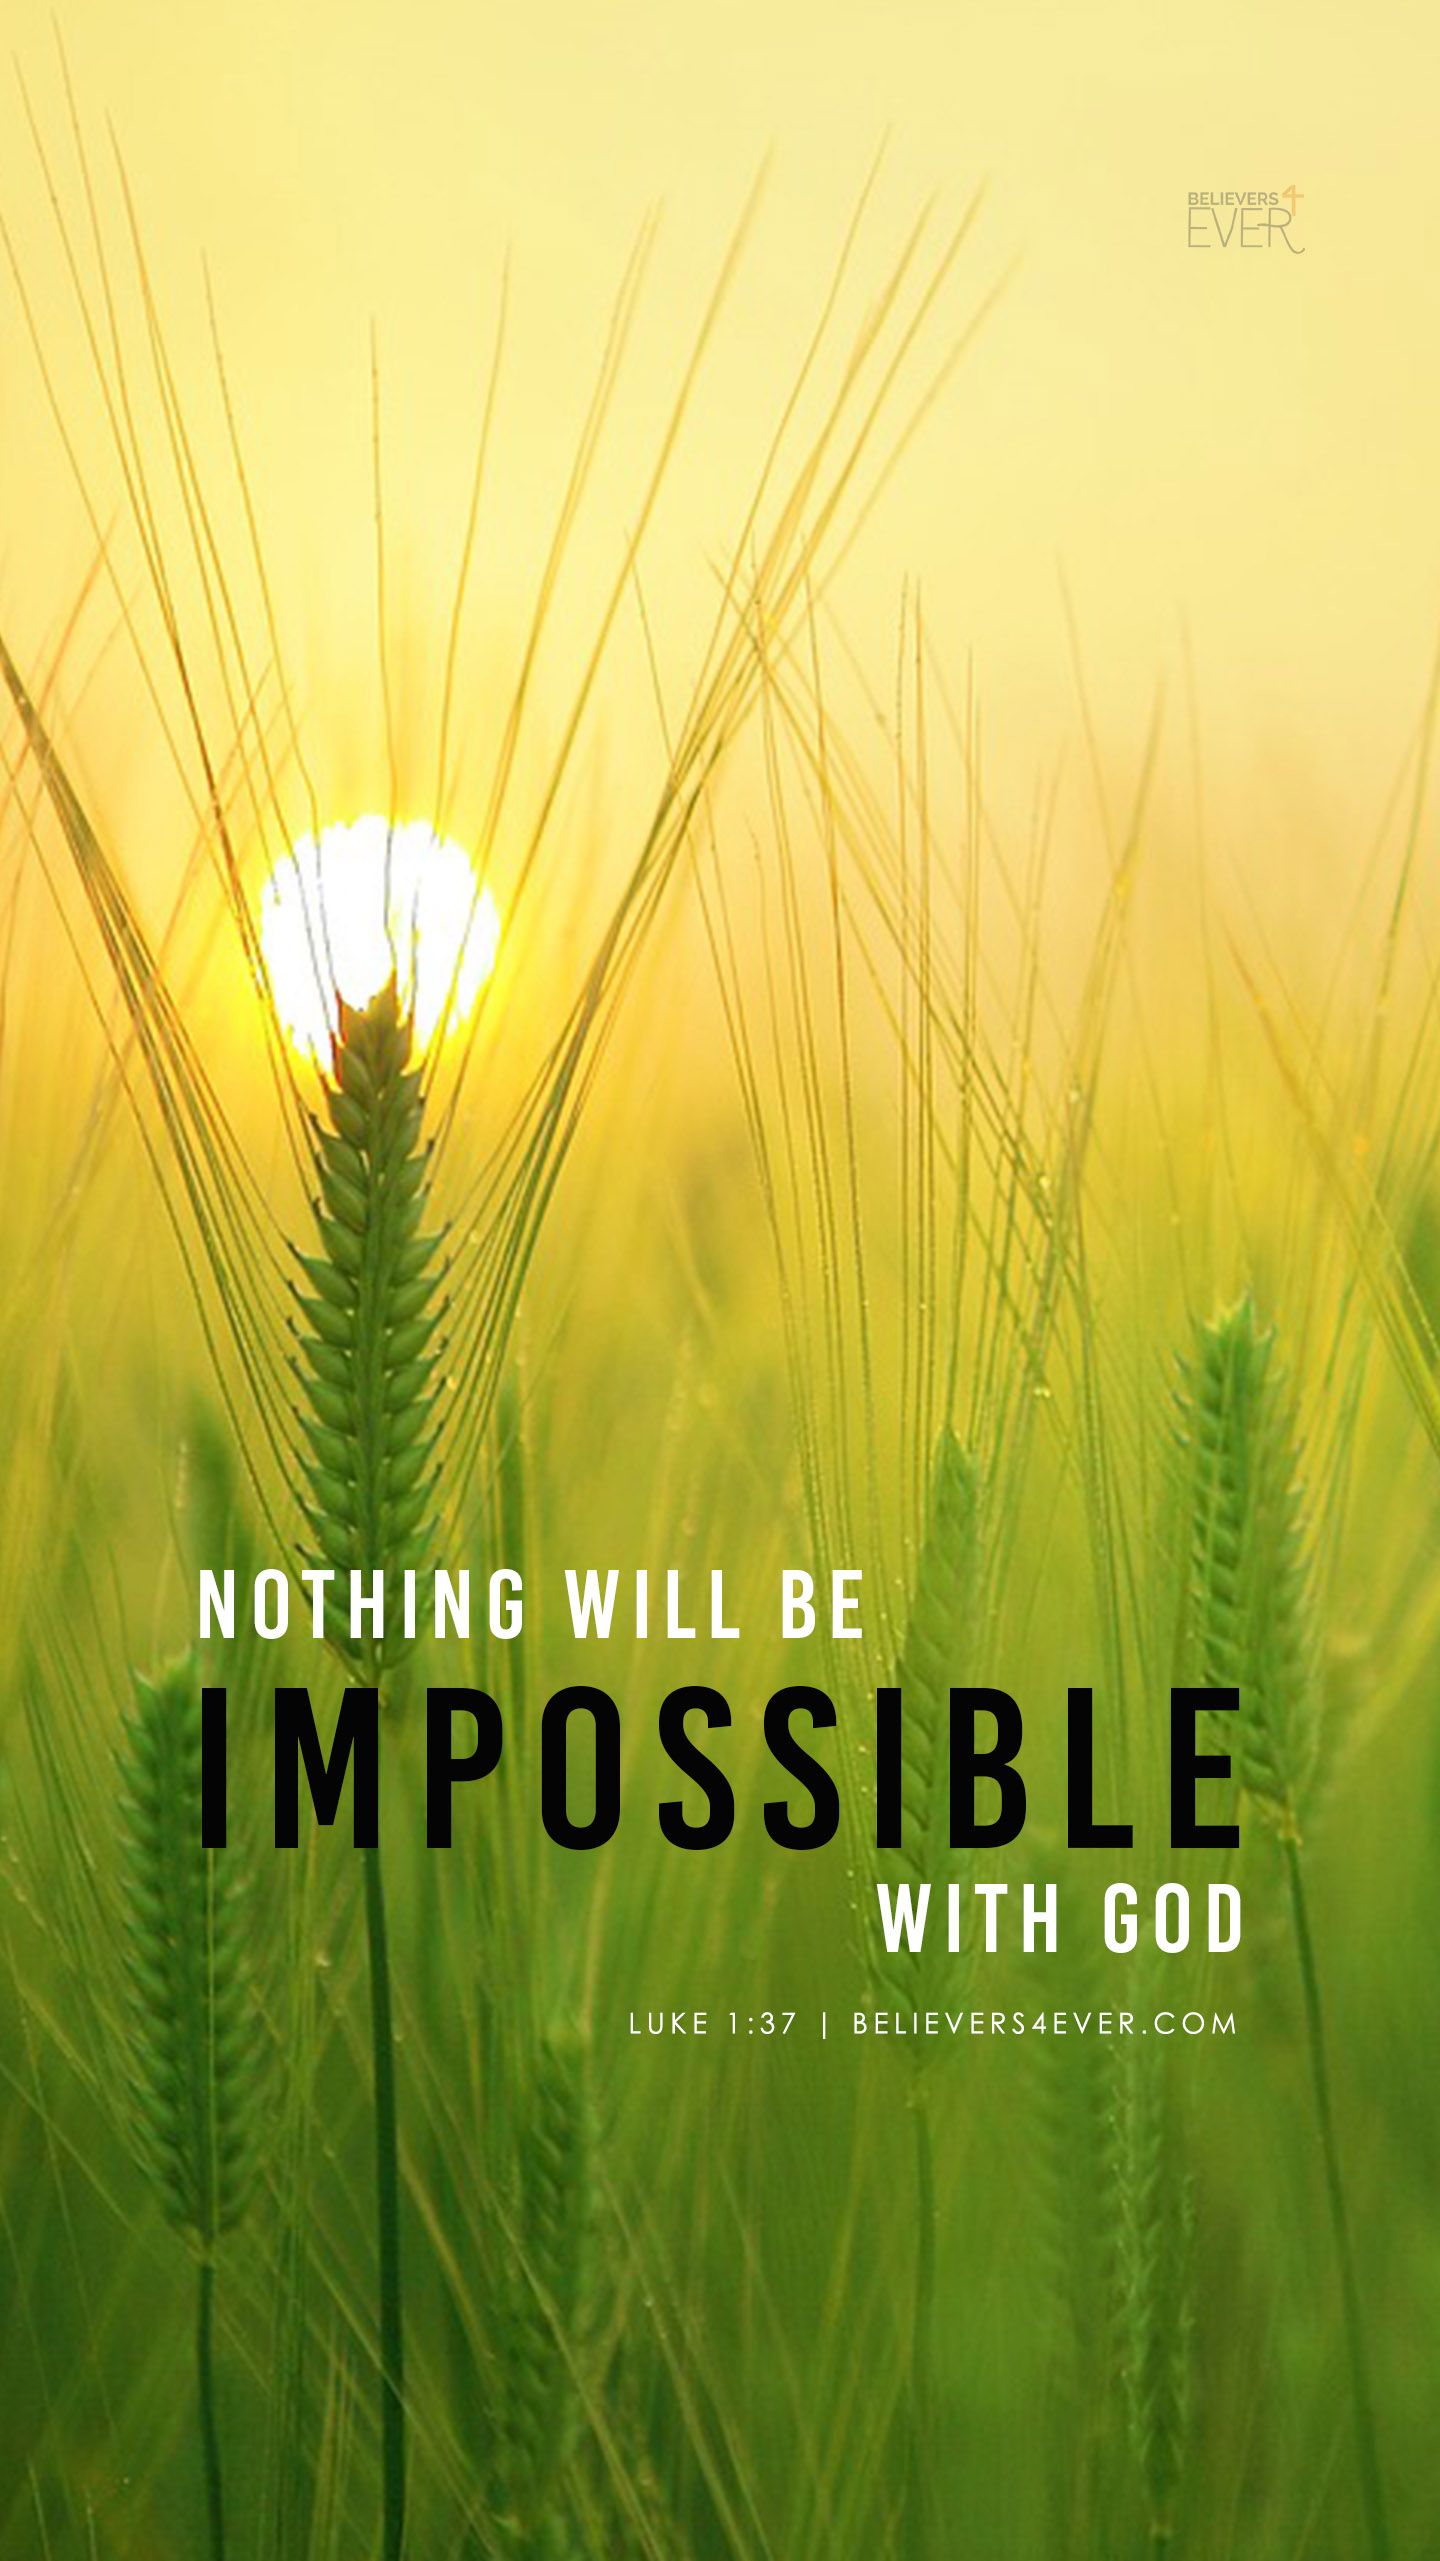 Nothing will be impossible with God